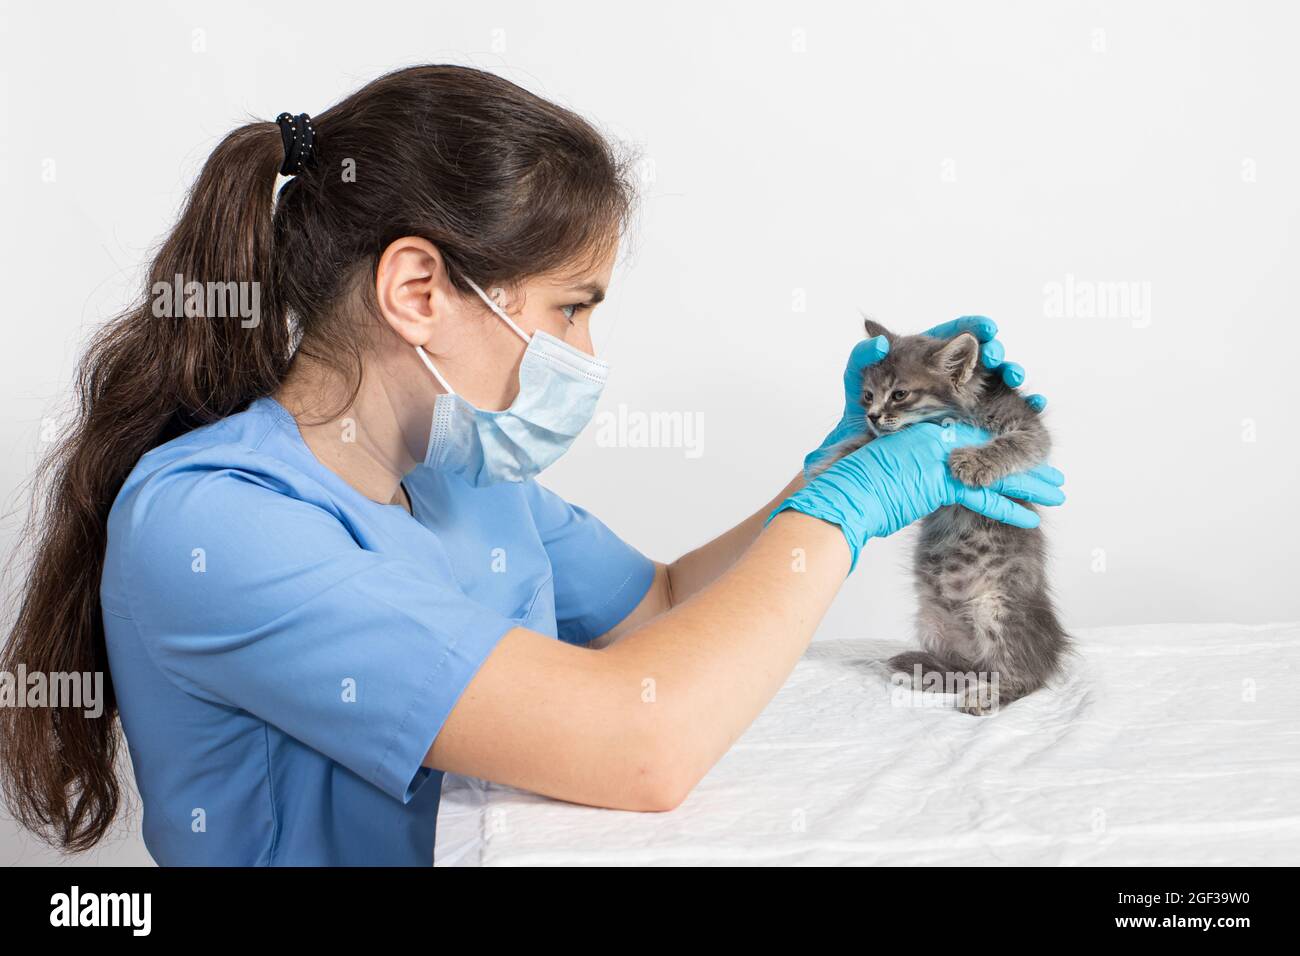 Examination of the one or two month old kitten. Veterinary clinic, prevention and treatment of diseases in cats Stock Photo